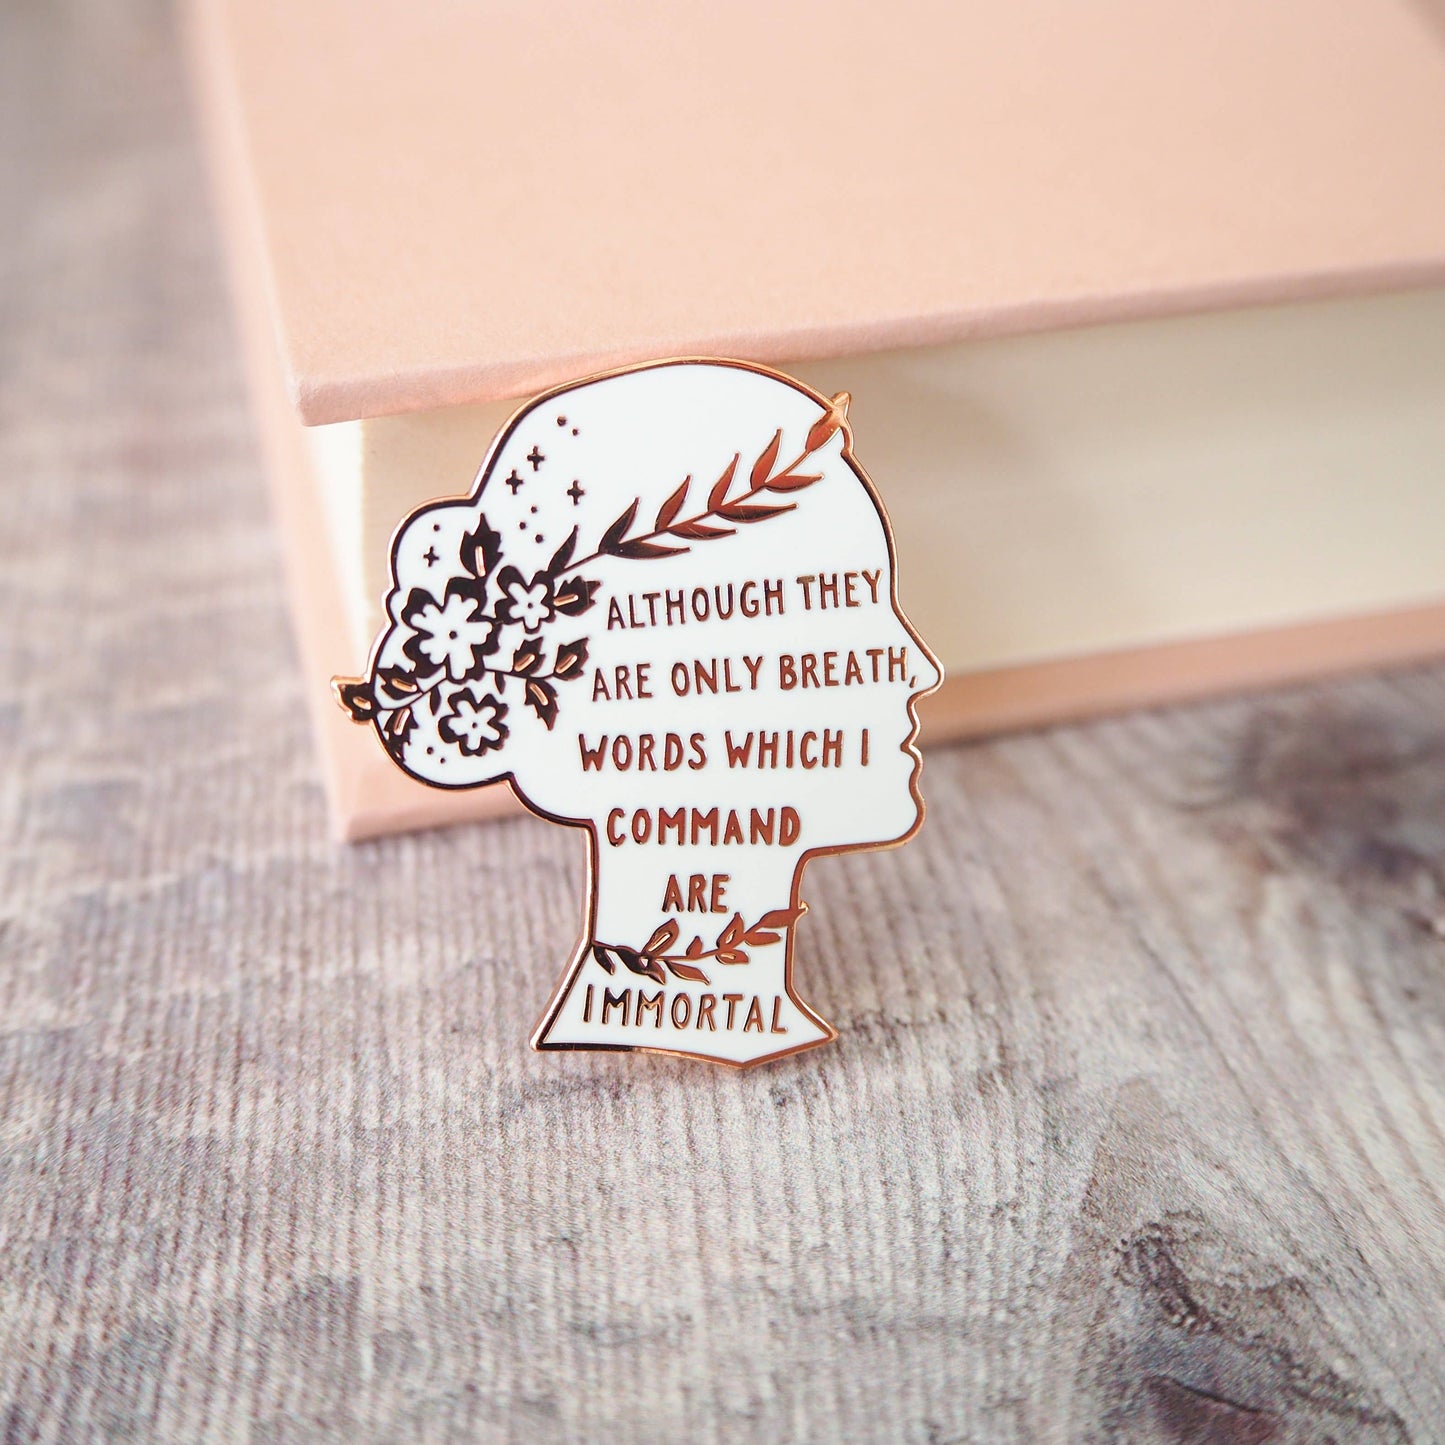 Sappho Poetry Enamel Pin - Women Poets Collection